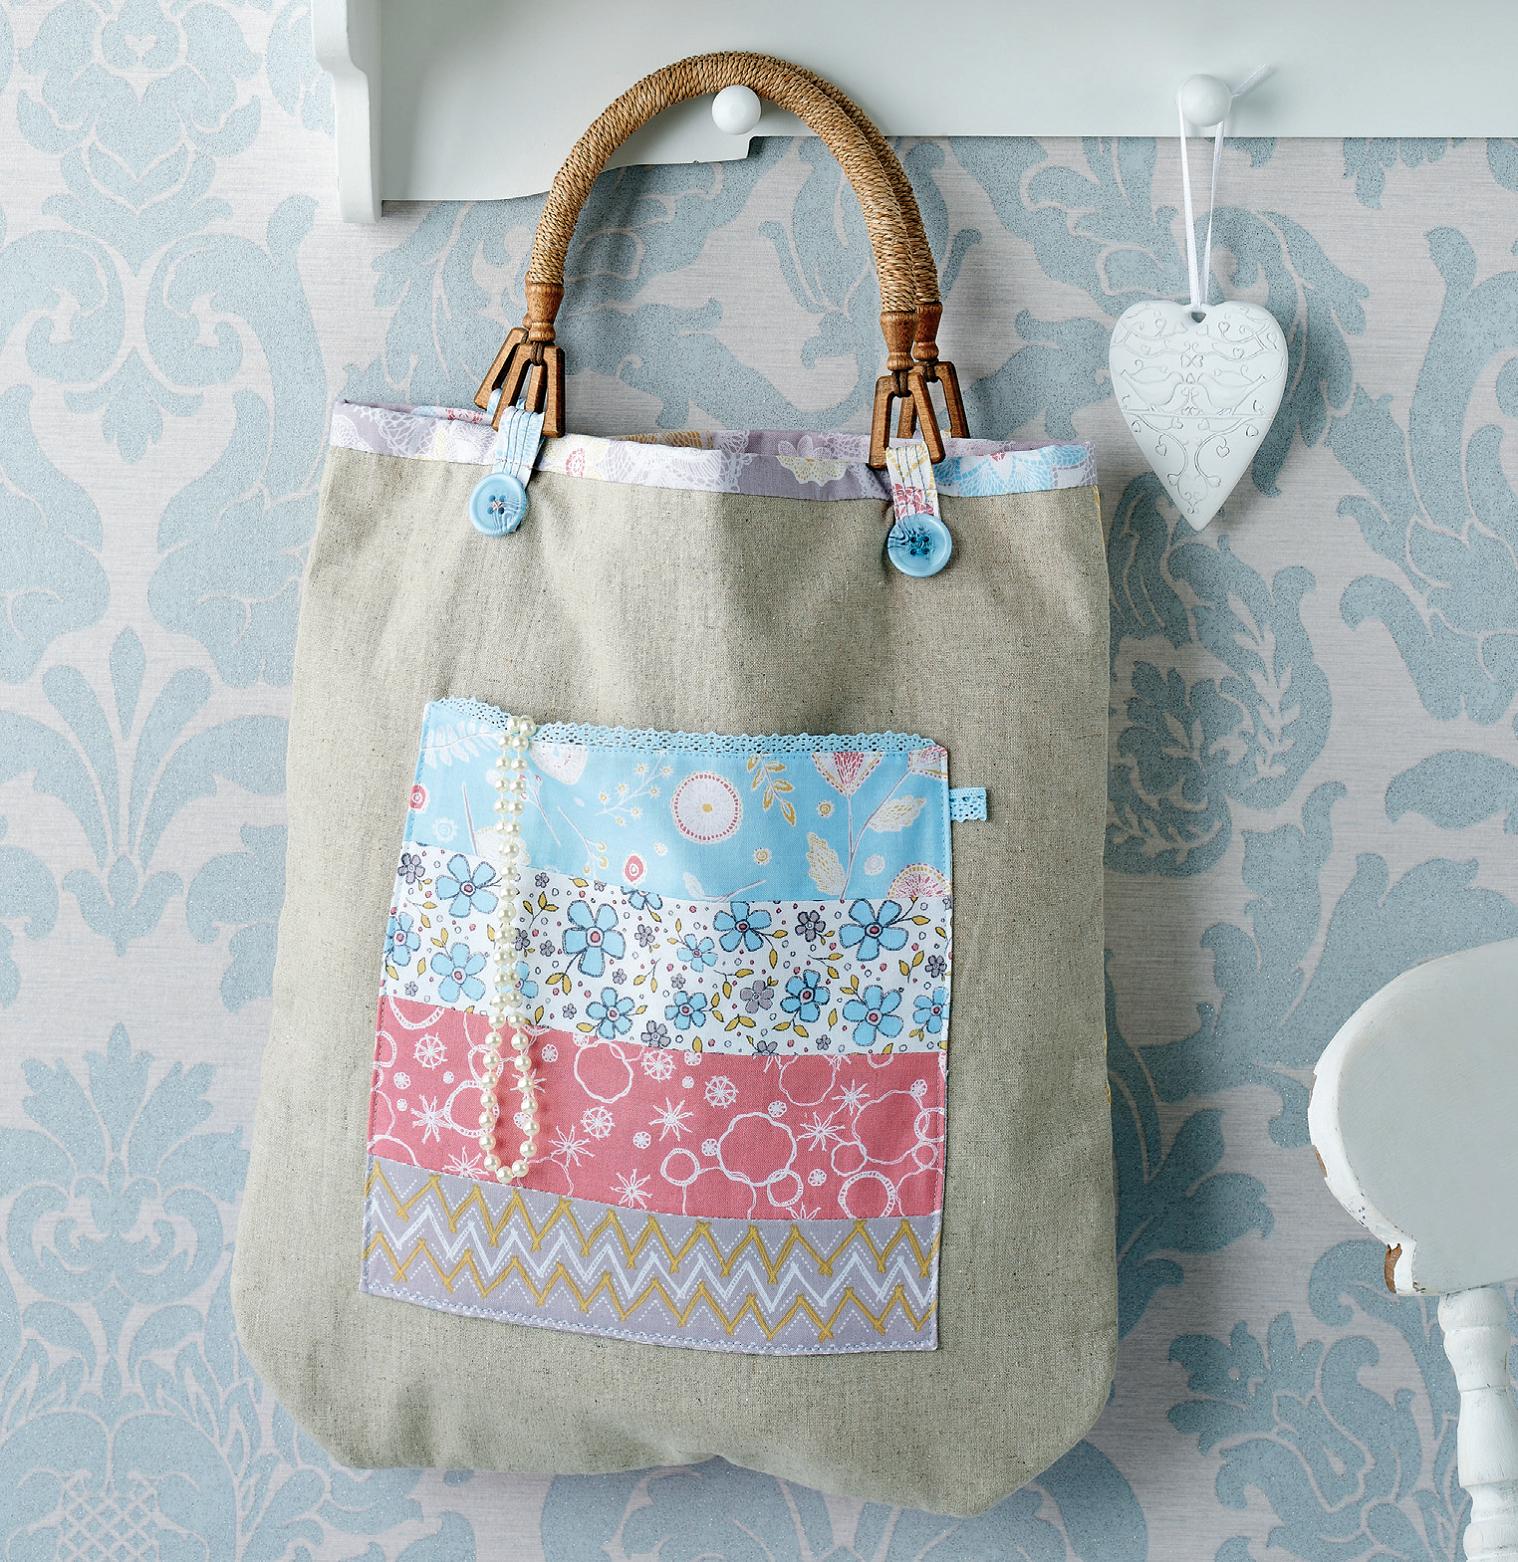 Wooden Handled Linen Tote Bag - Free sewing patterns - Sew Magazine